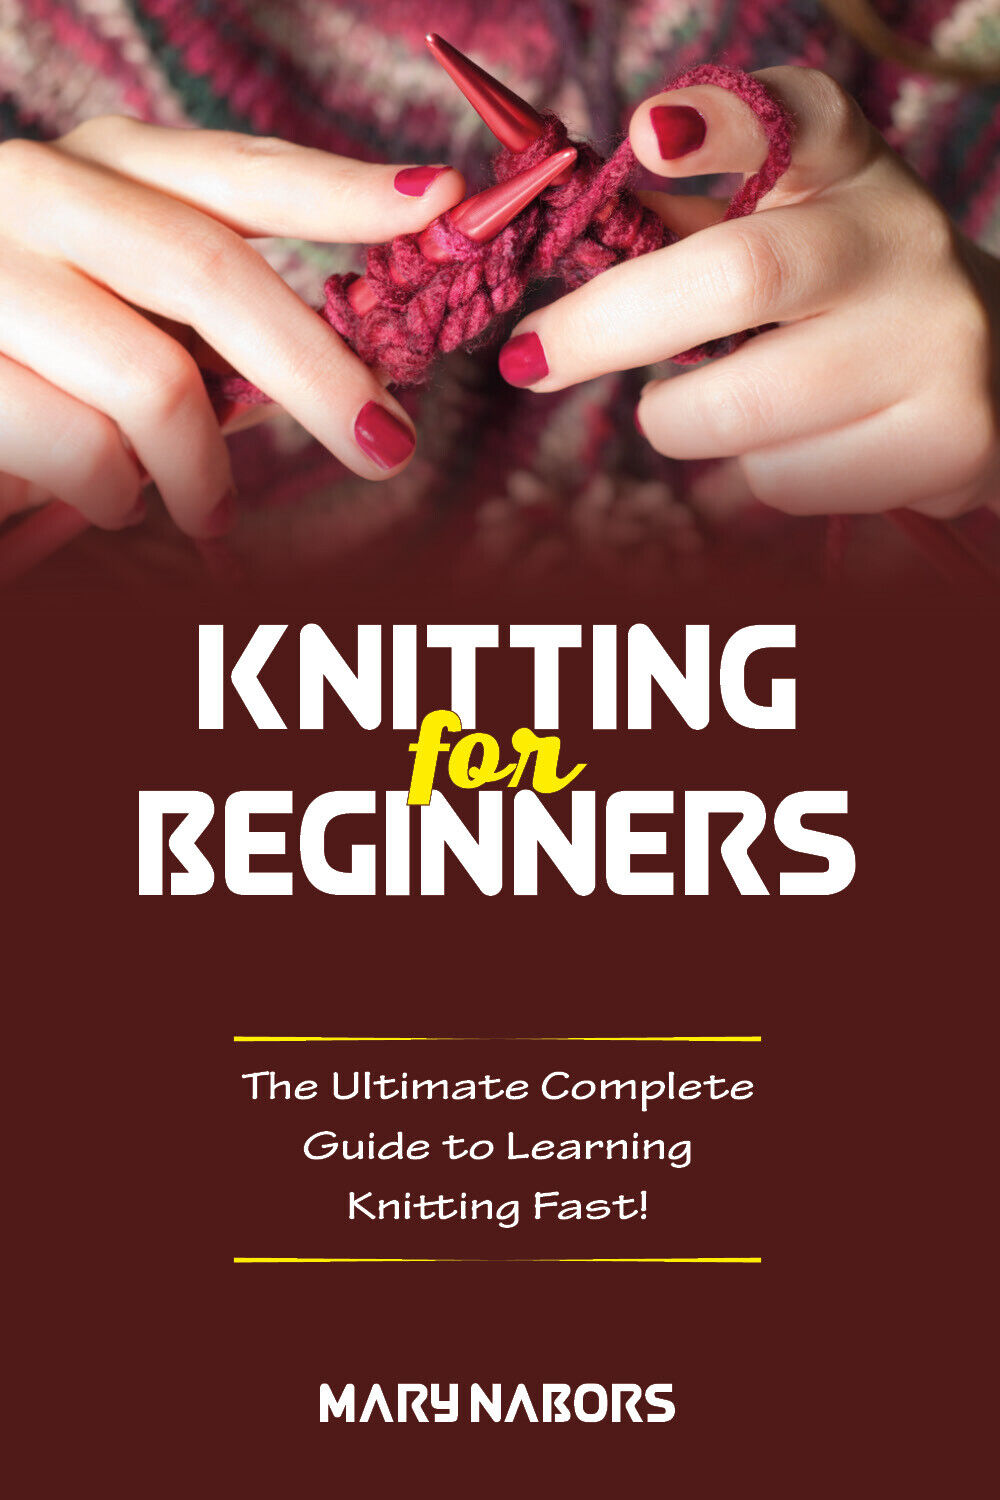 Knitting for beginners. The Ultimate Complete Guide To Learning Knitting Fast! d